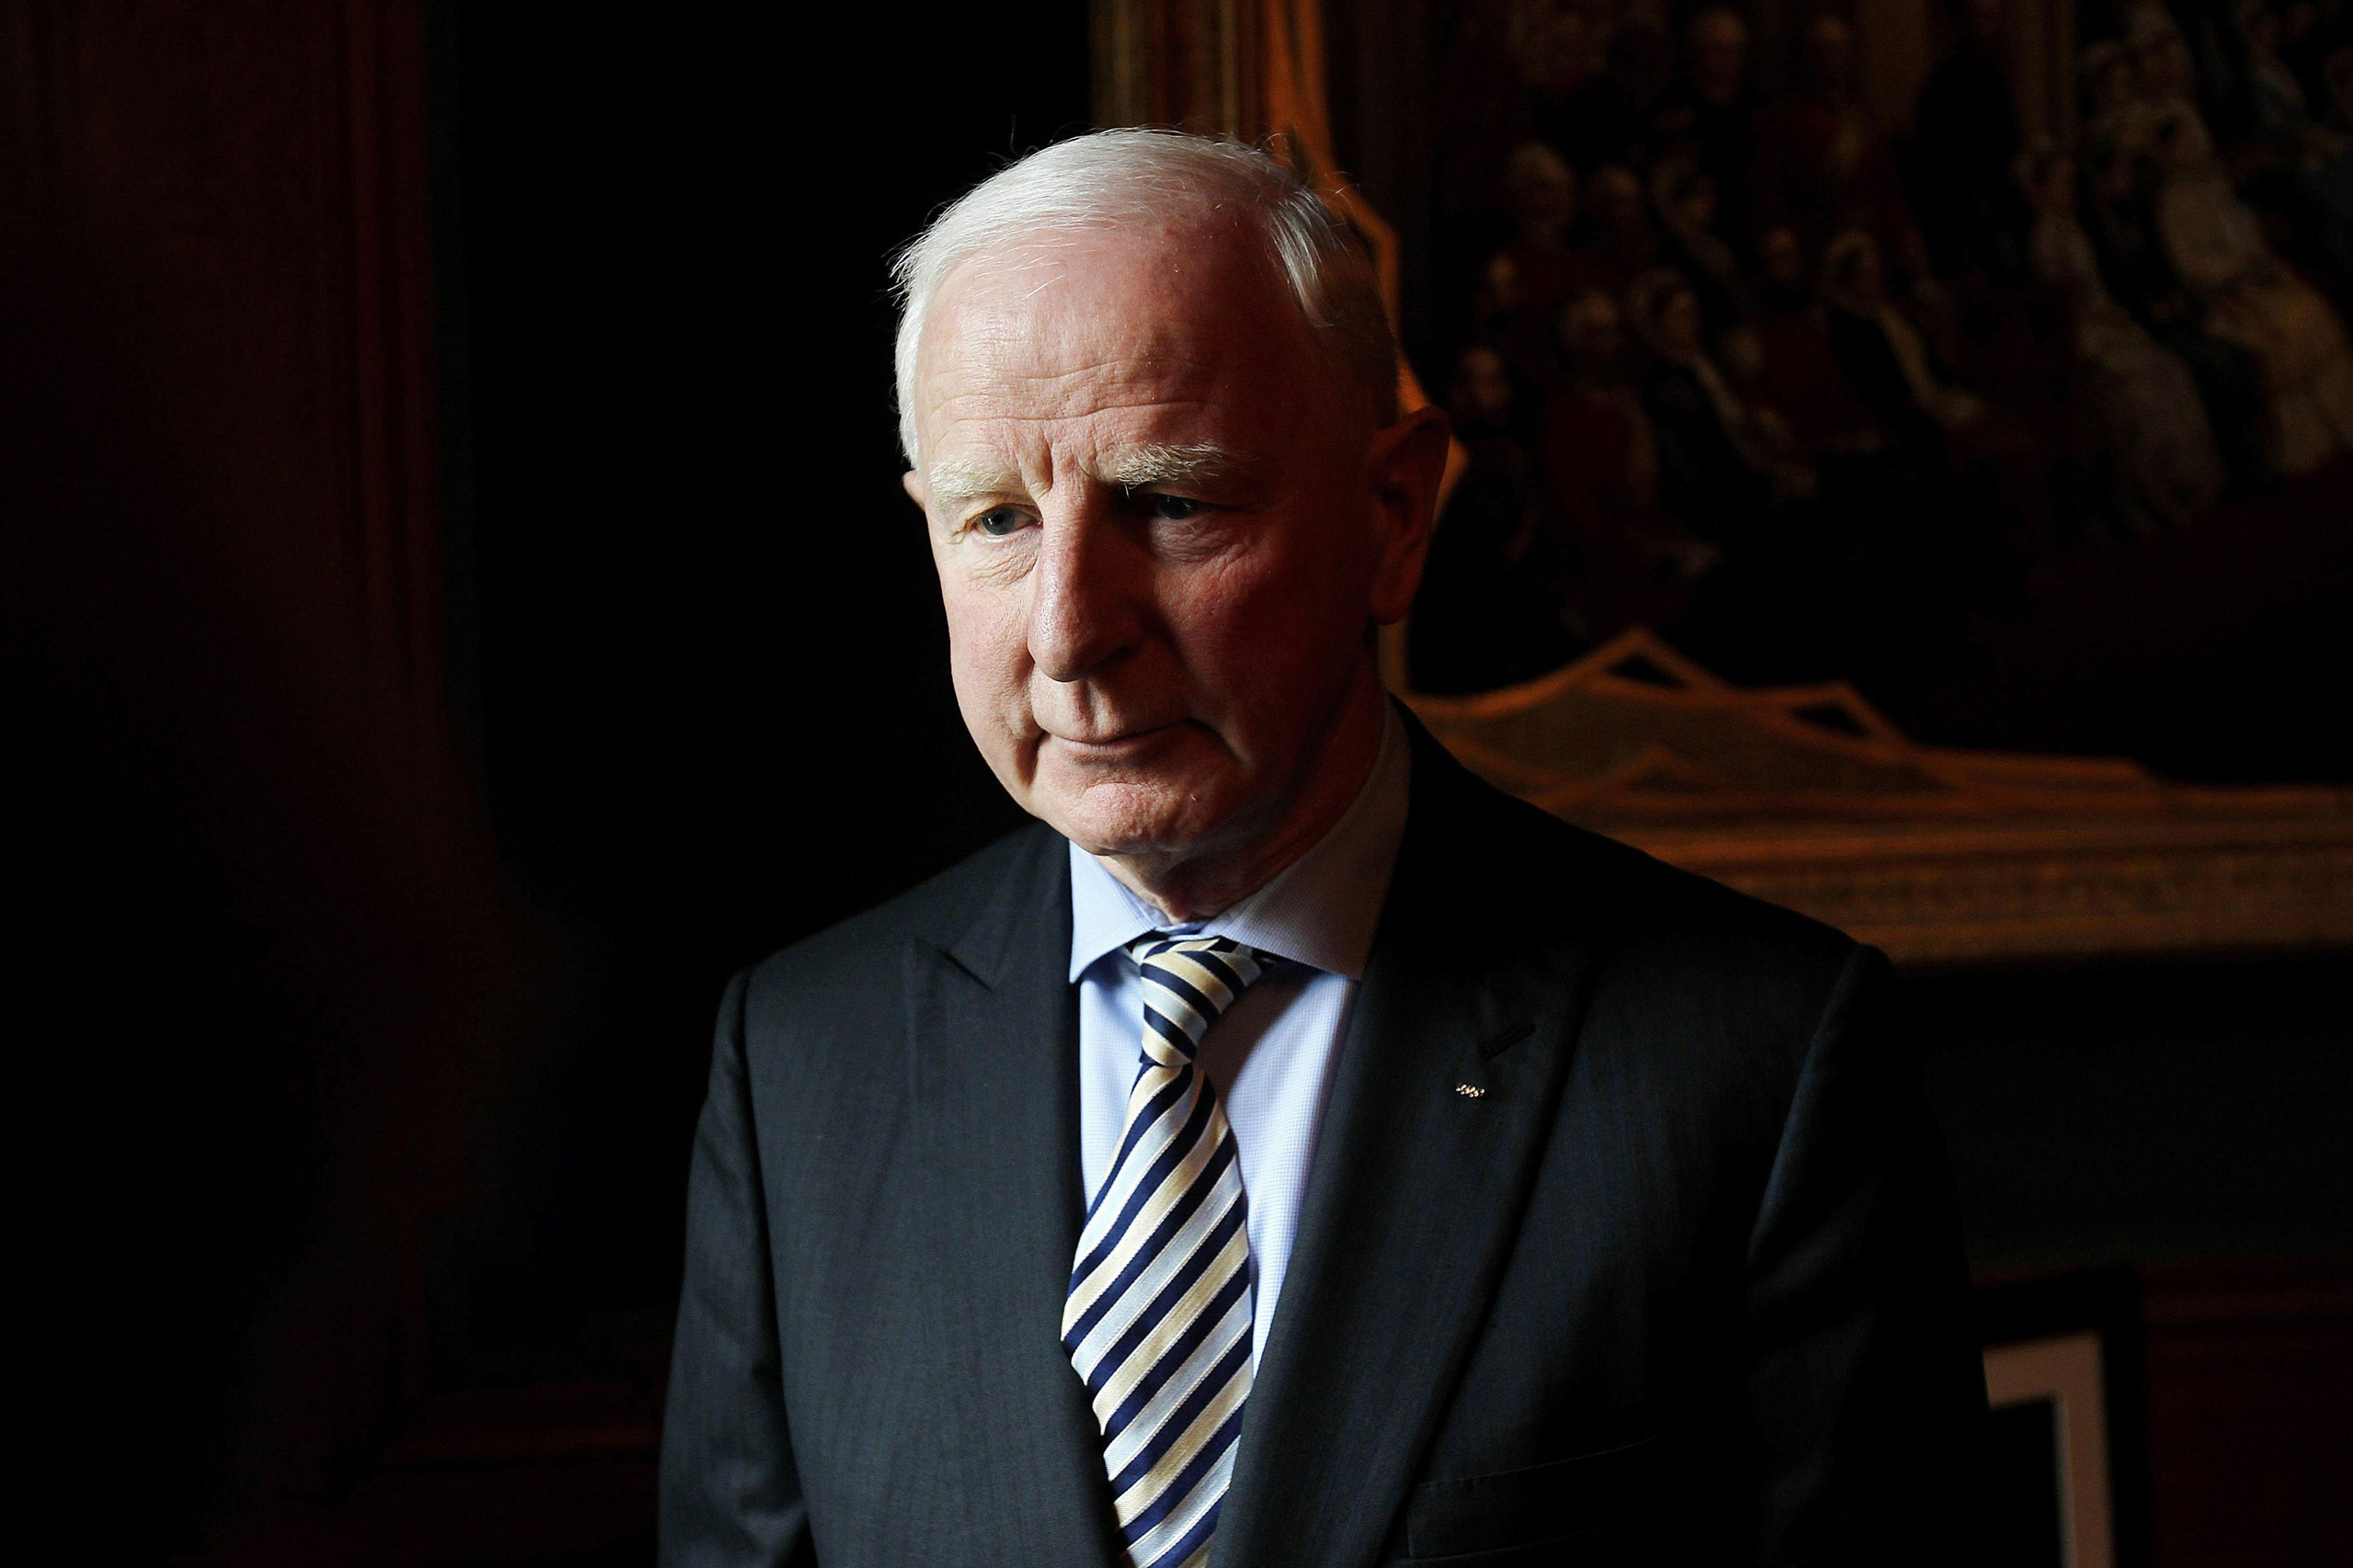 Patrick Hickey, President of the Olympic Council of Ireland in 2012. (Julien Behal—PA Wire/Zuma Press)